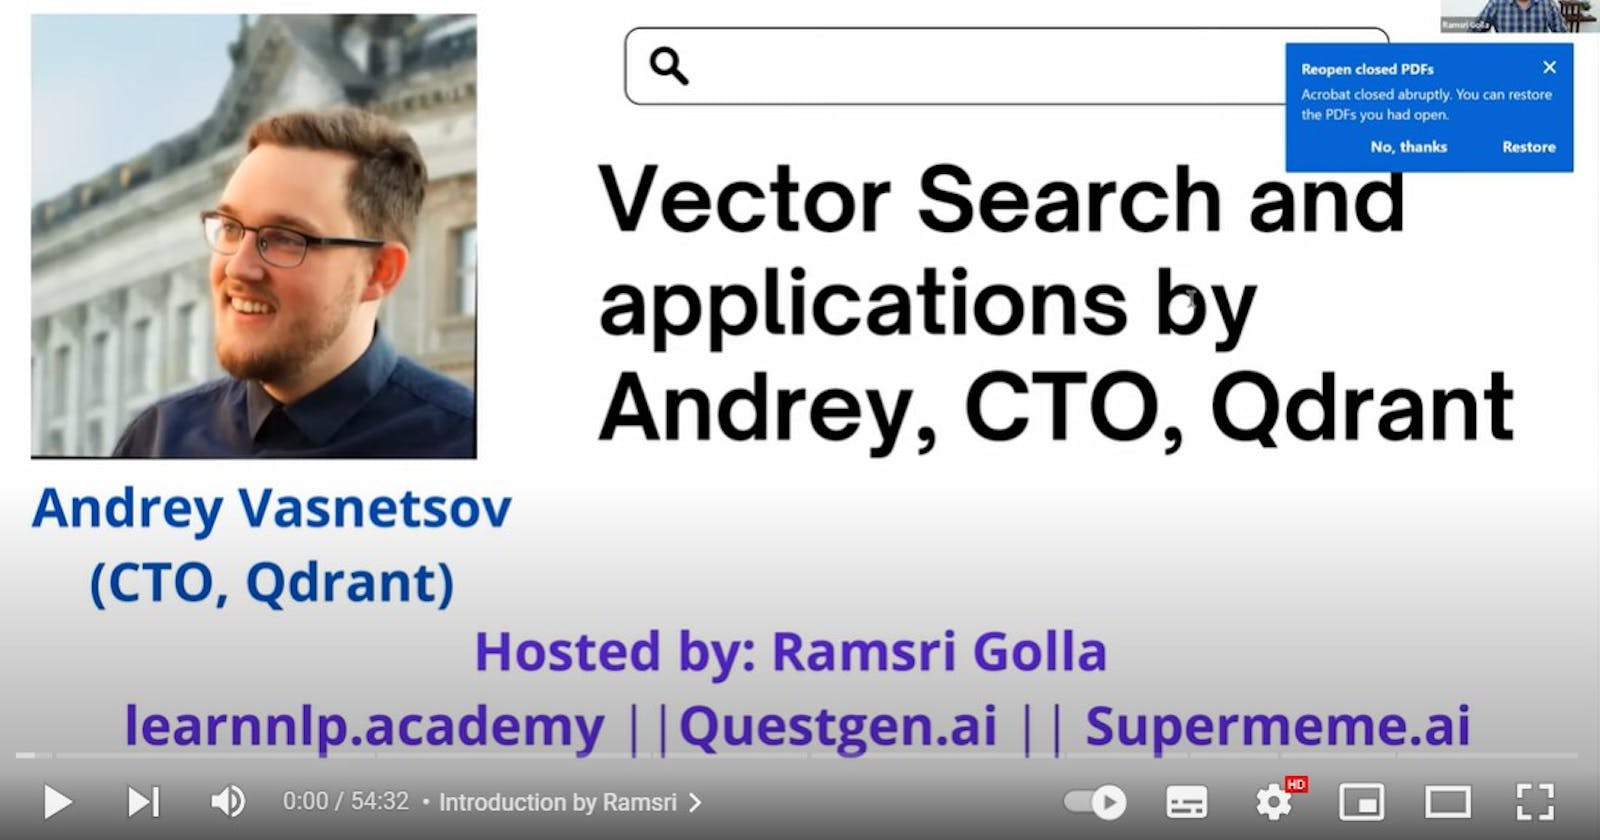 "Vector search and applications" by Andrey Vasnetsov, CTO at Qdrant